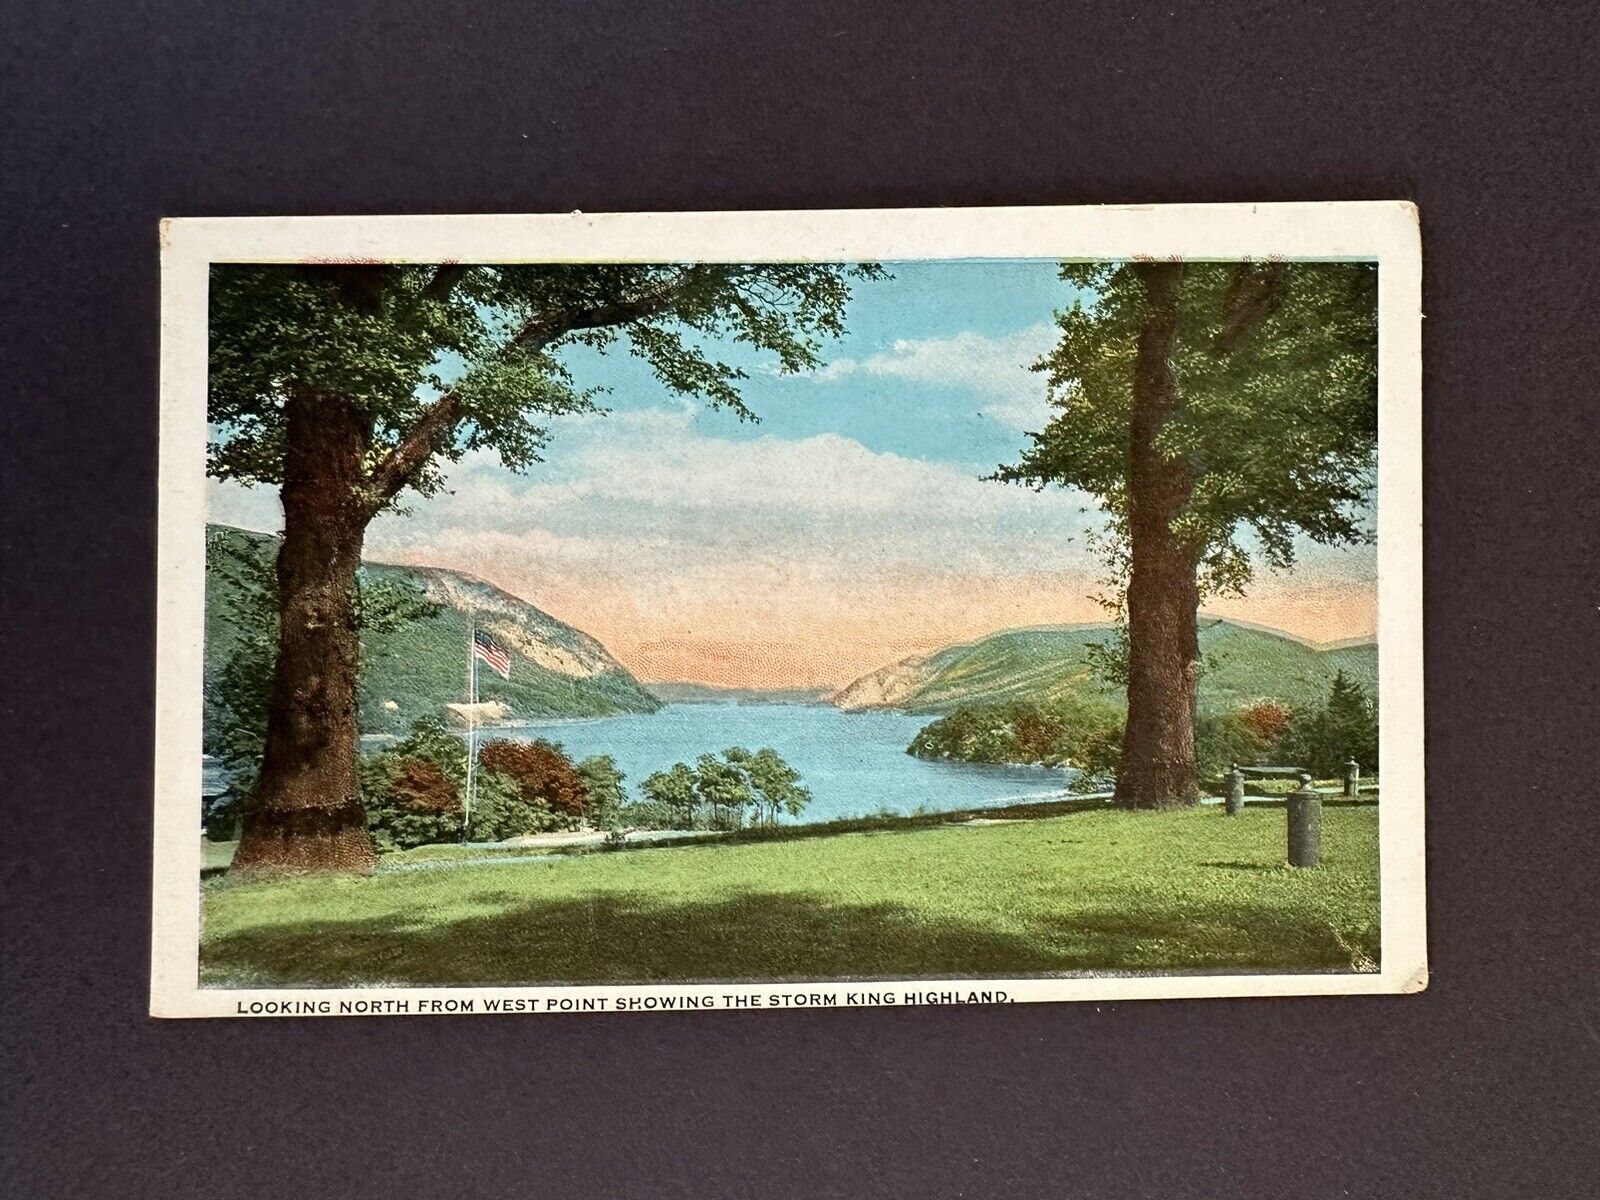 LOOKING NORTH FROM WEST POINT SHOWING THE STORM KING HIGHLAND N.Y. Postcard D141